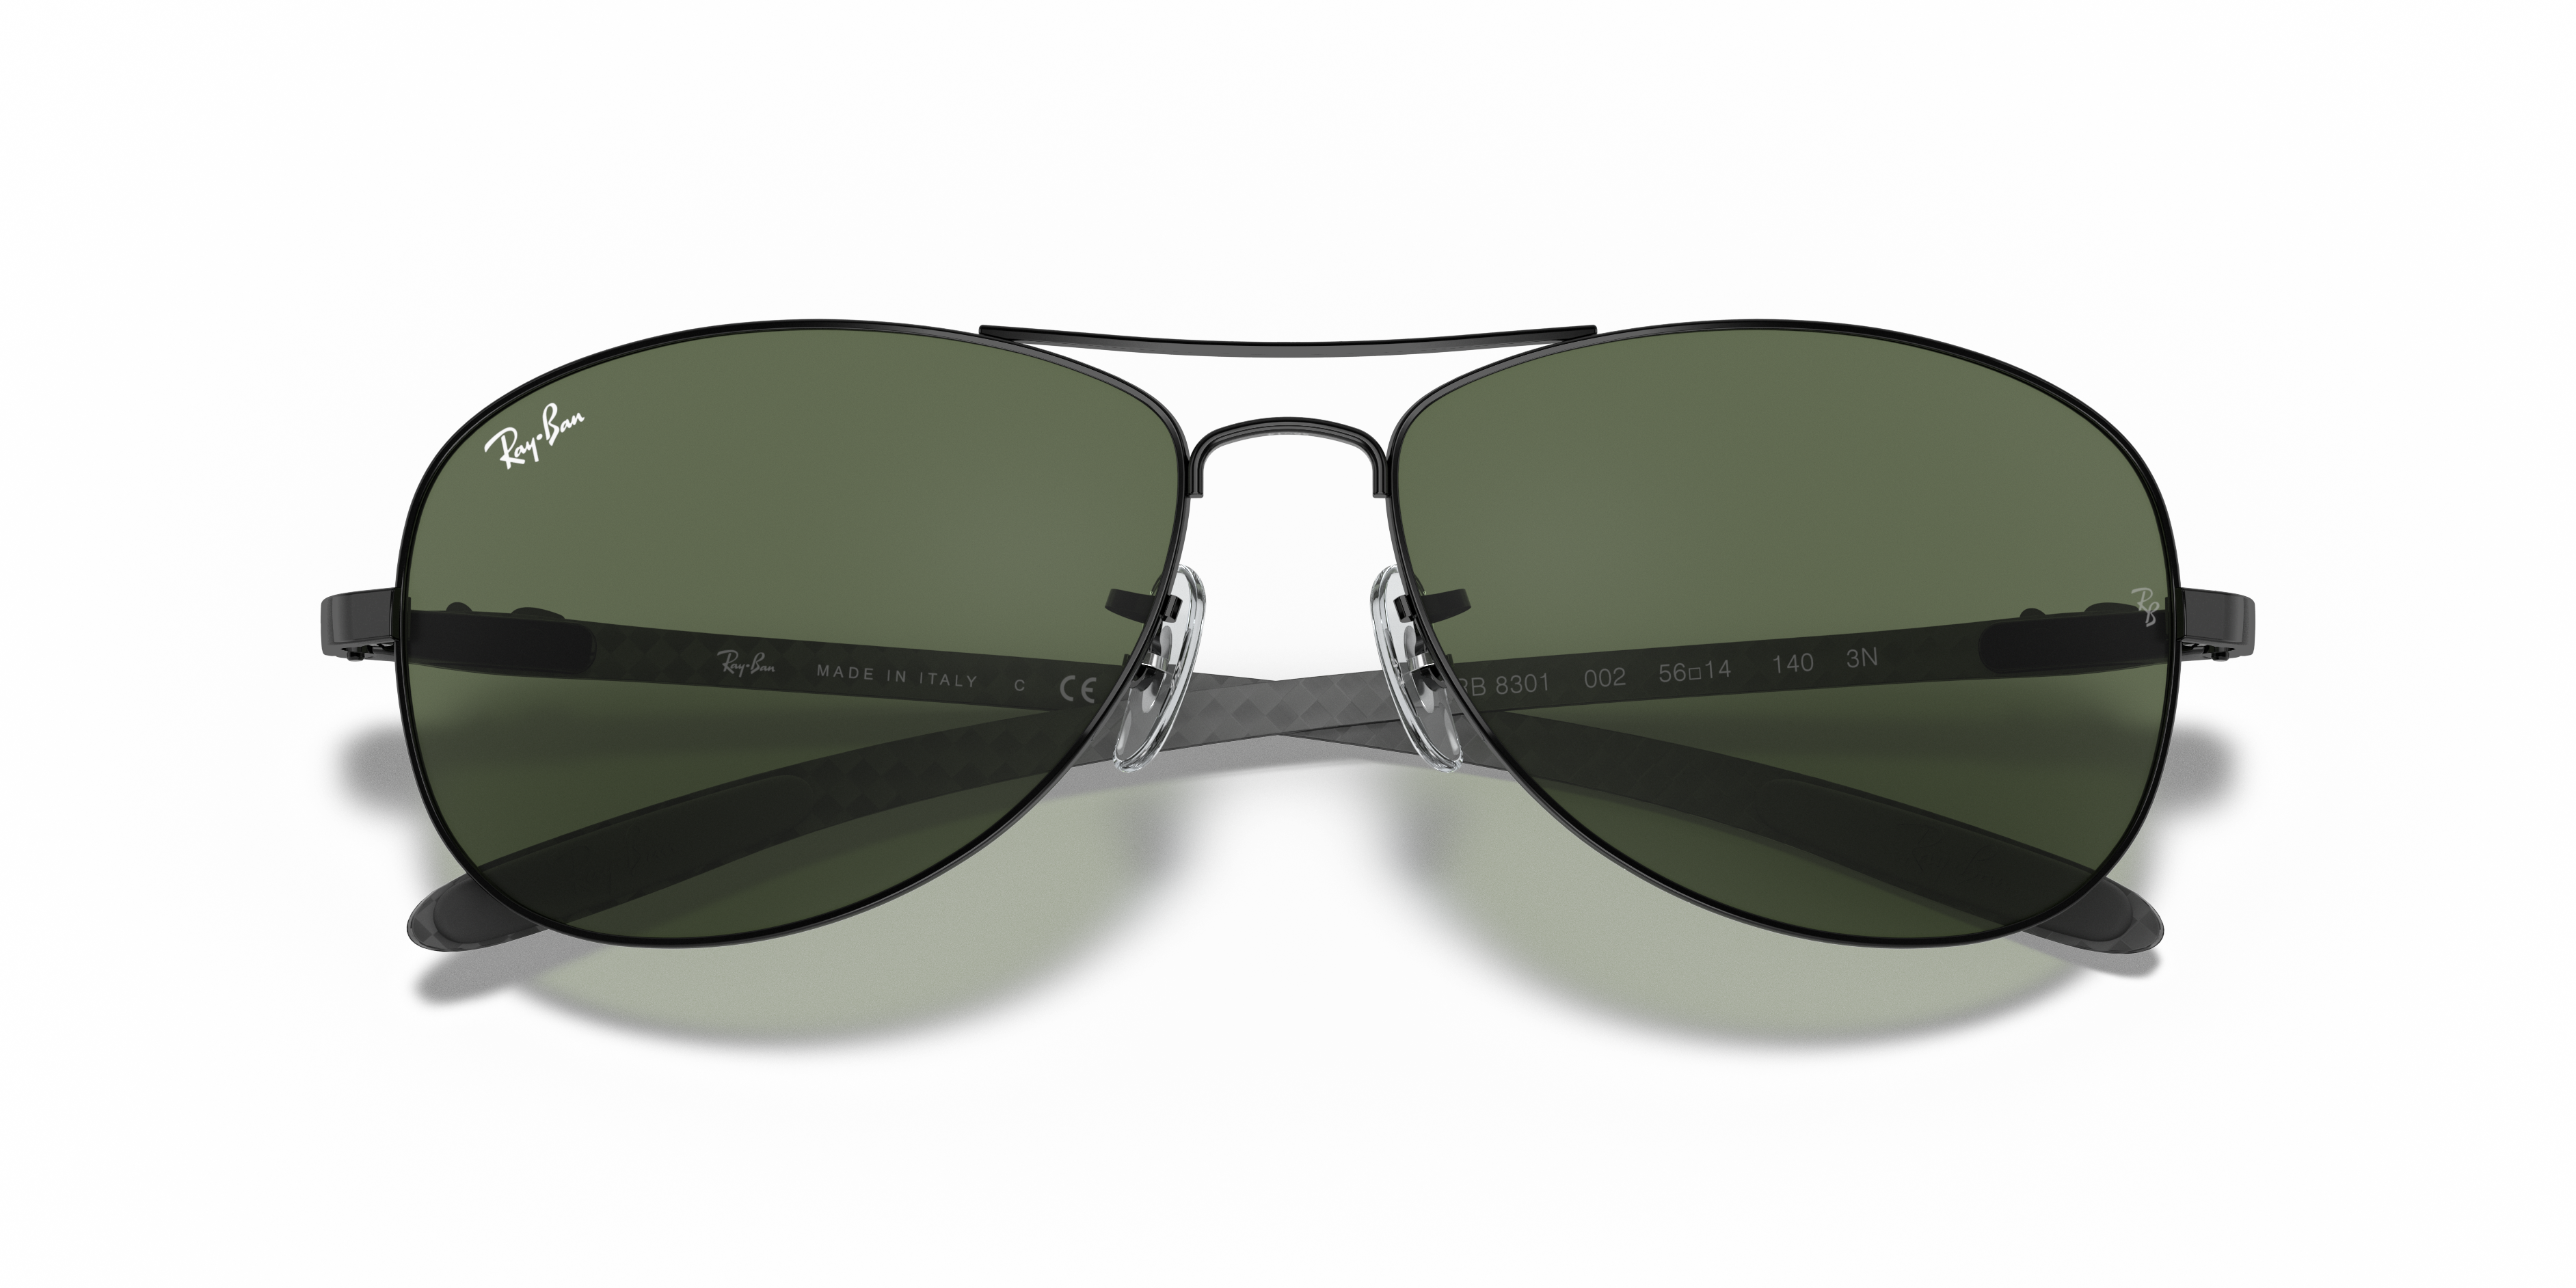 RB8301 Sunglasses in Black and Green | Ray-Ban®